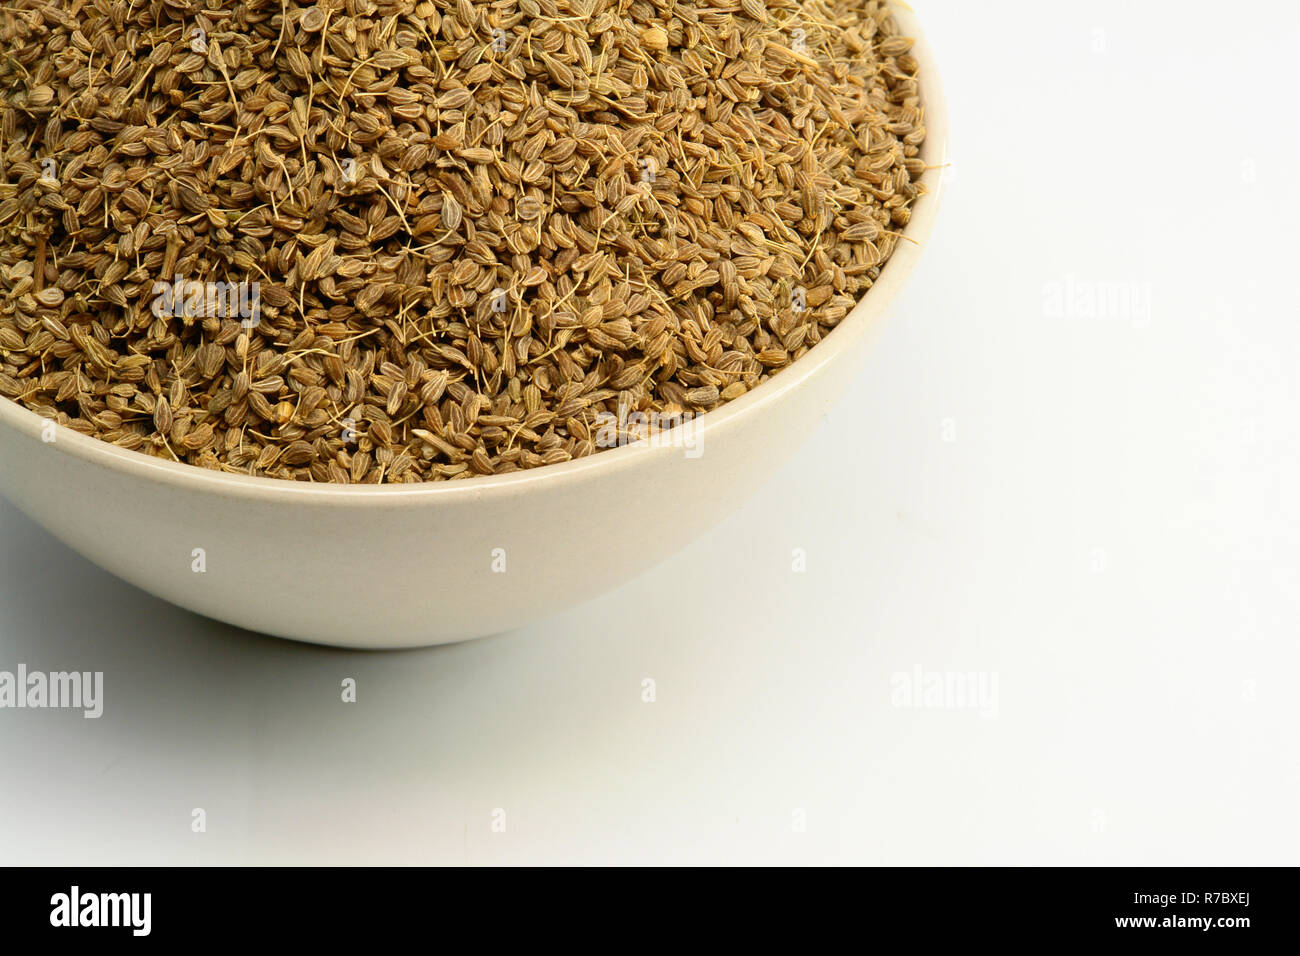 A Bowl of Anise Seed Stock Photo